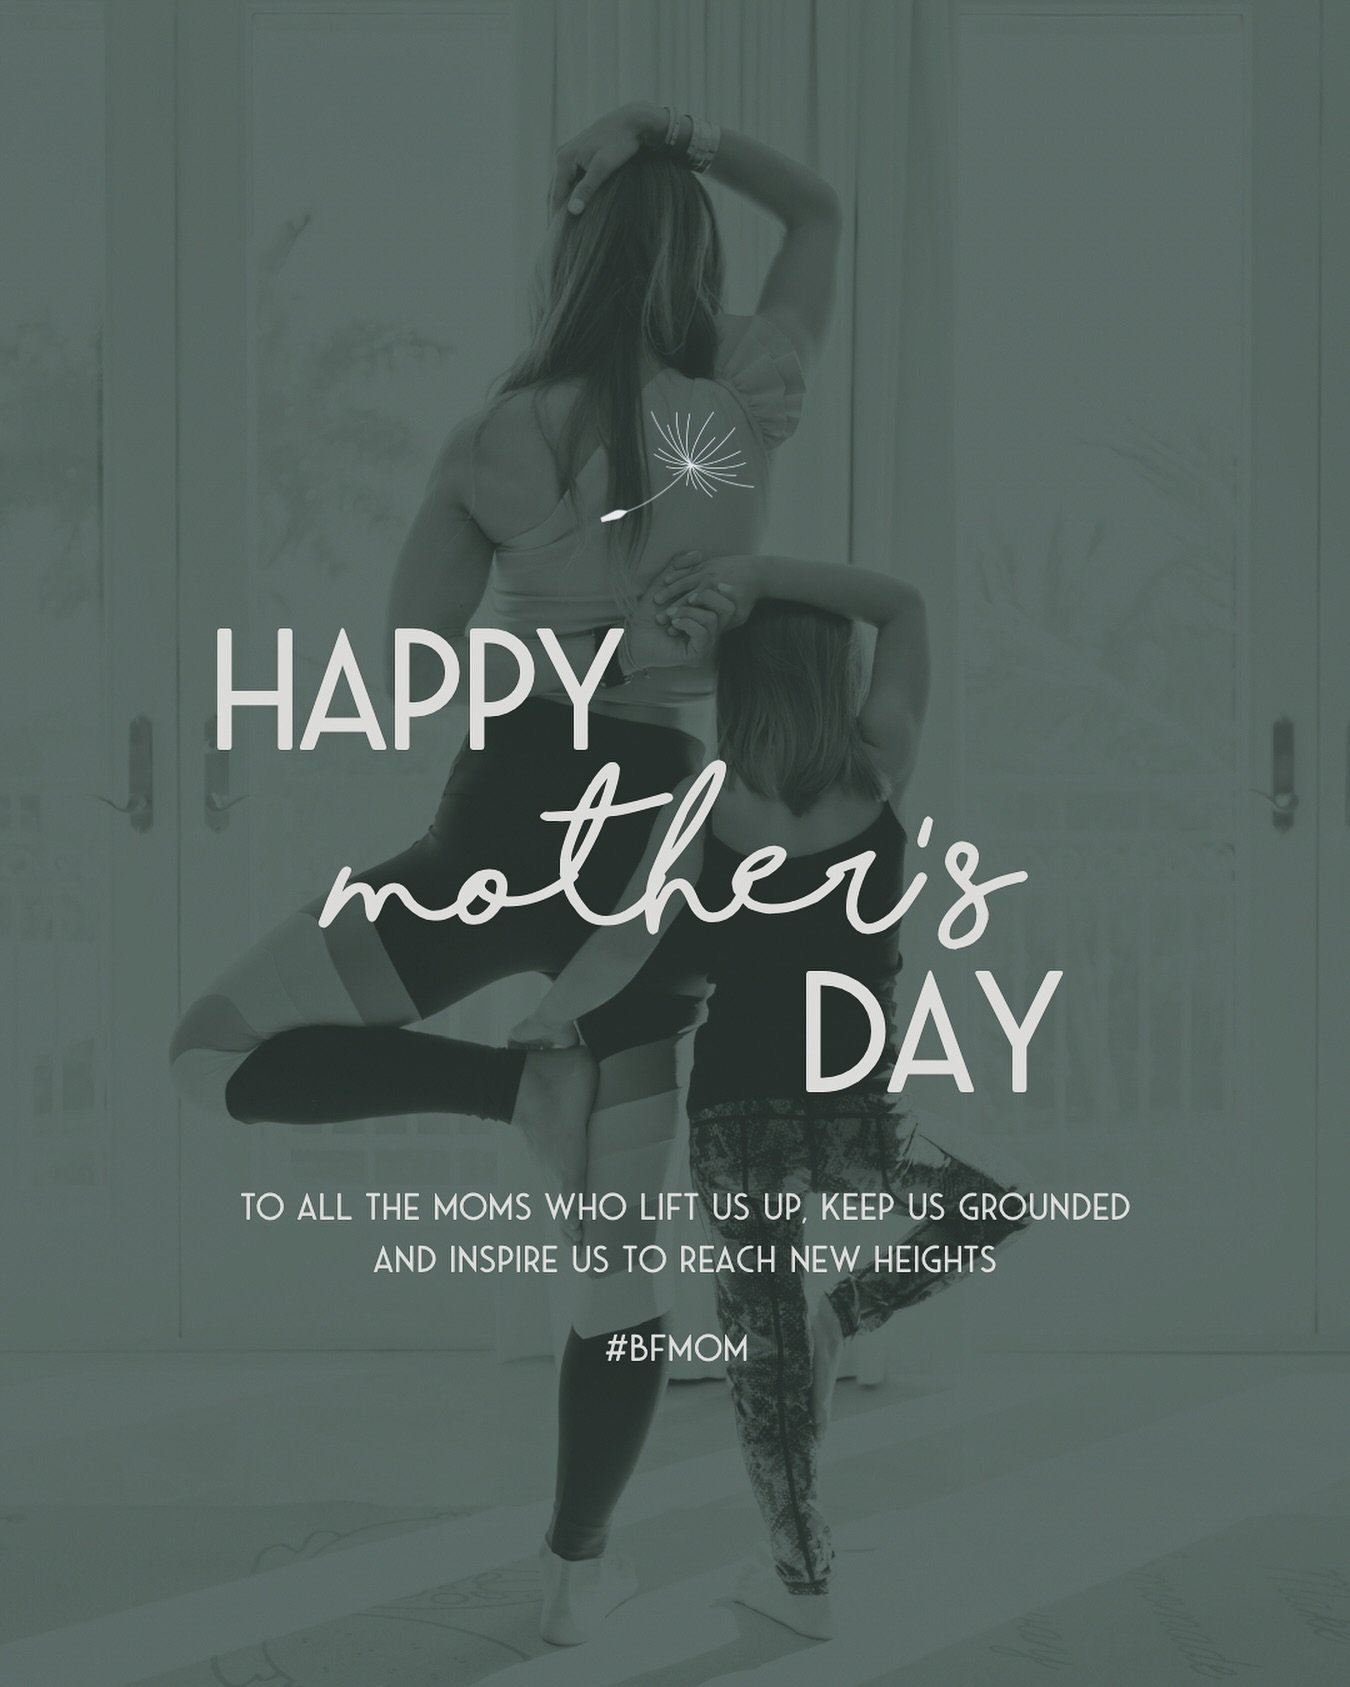 Happy Mother&rsquo;s Day! 💐 Today, we celebrate you with love, laughter, and a little bit of yoga. 🧘&zwj;♀️✨ Whether you&rsquo;re a mom, a mother figure, or a guiding light in someone&rsquo;s life, we honor your strength and love. 
To all our Break